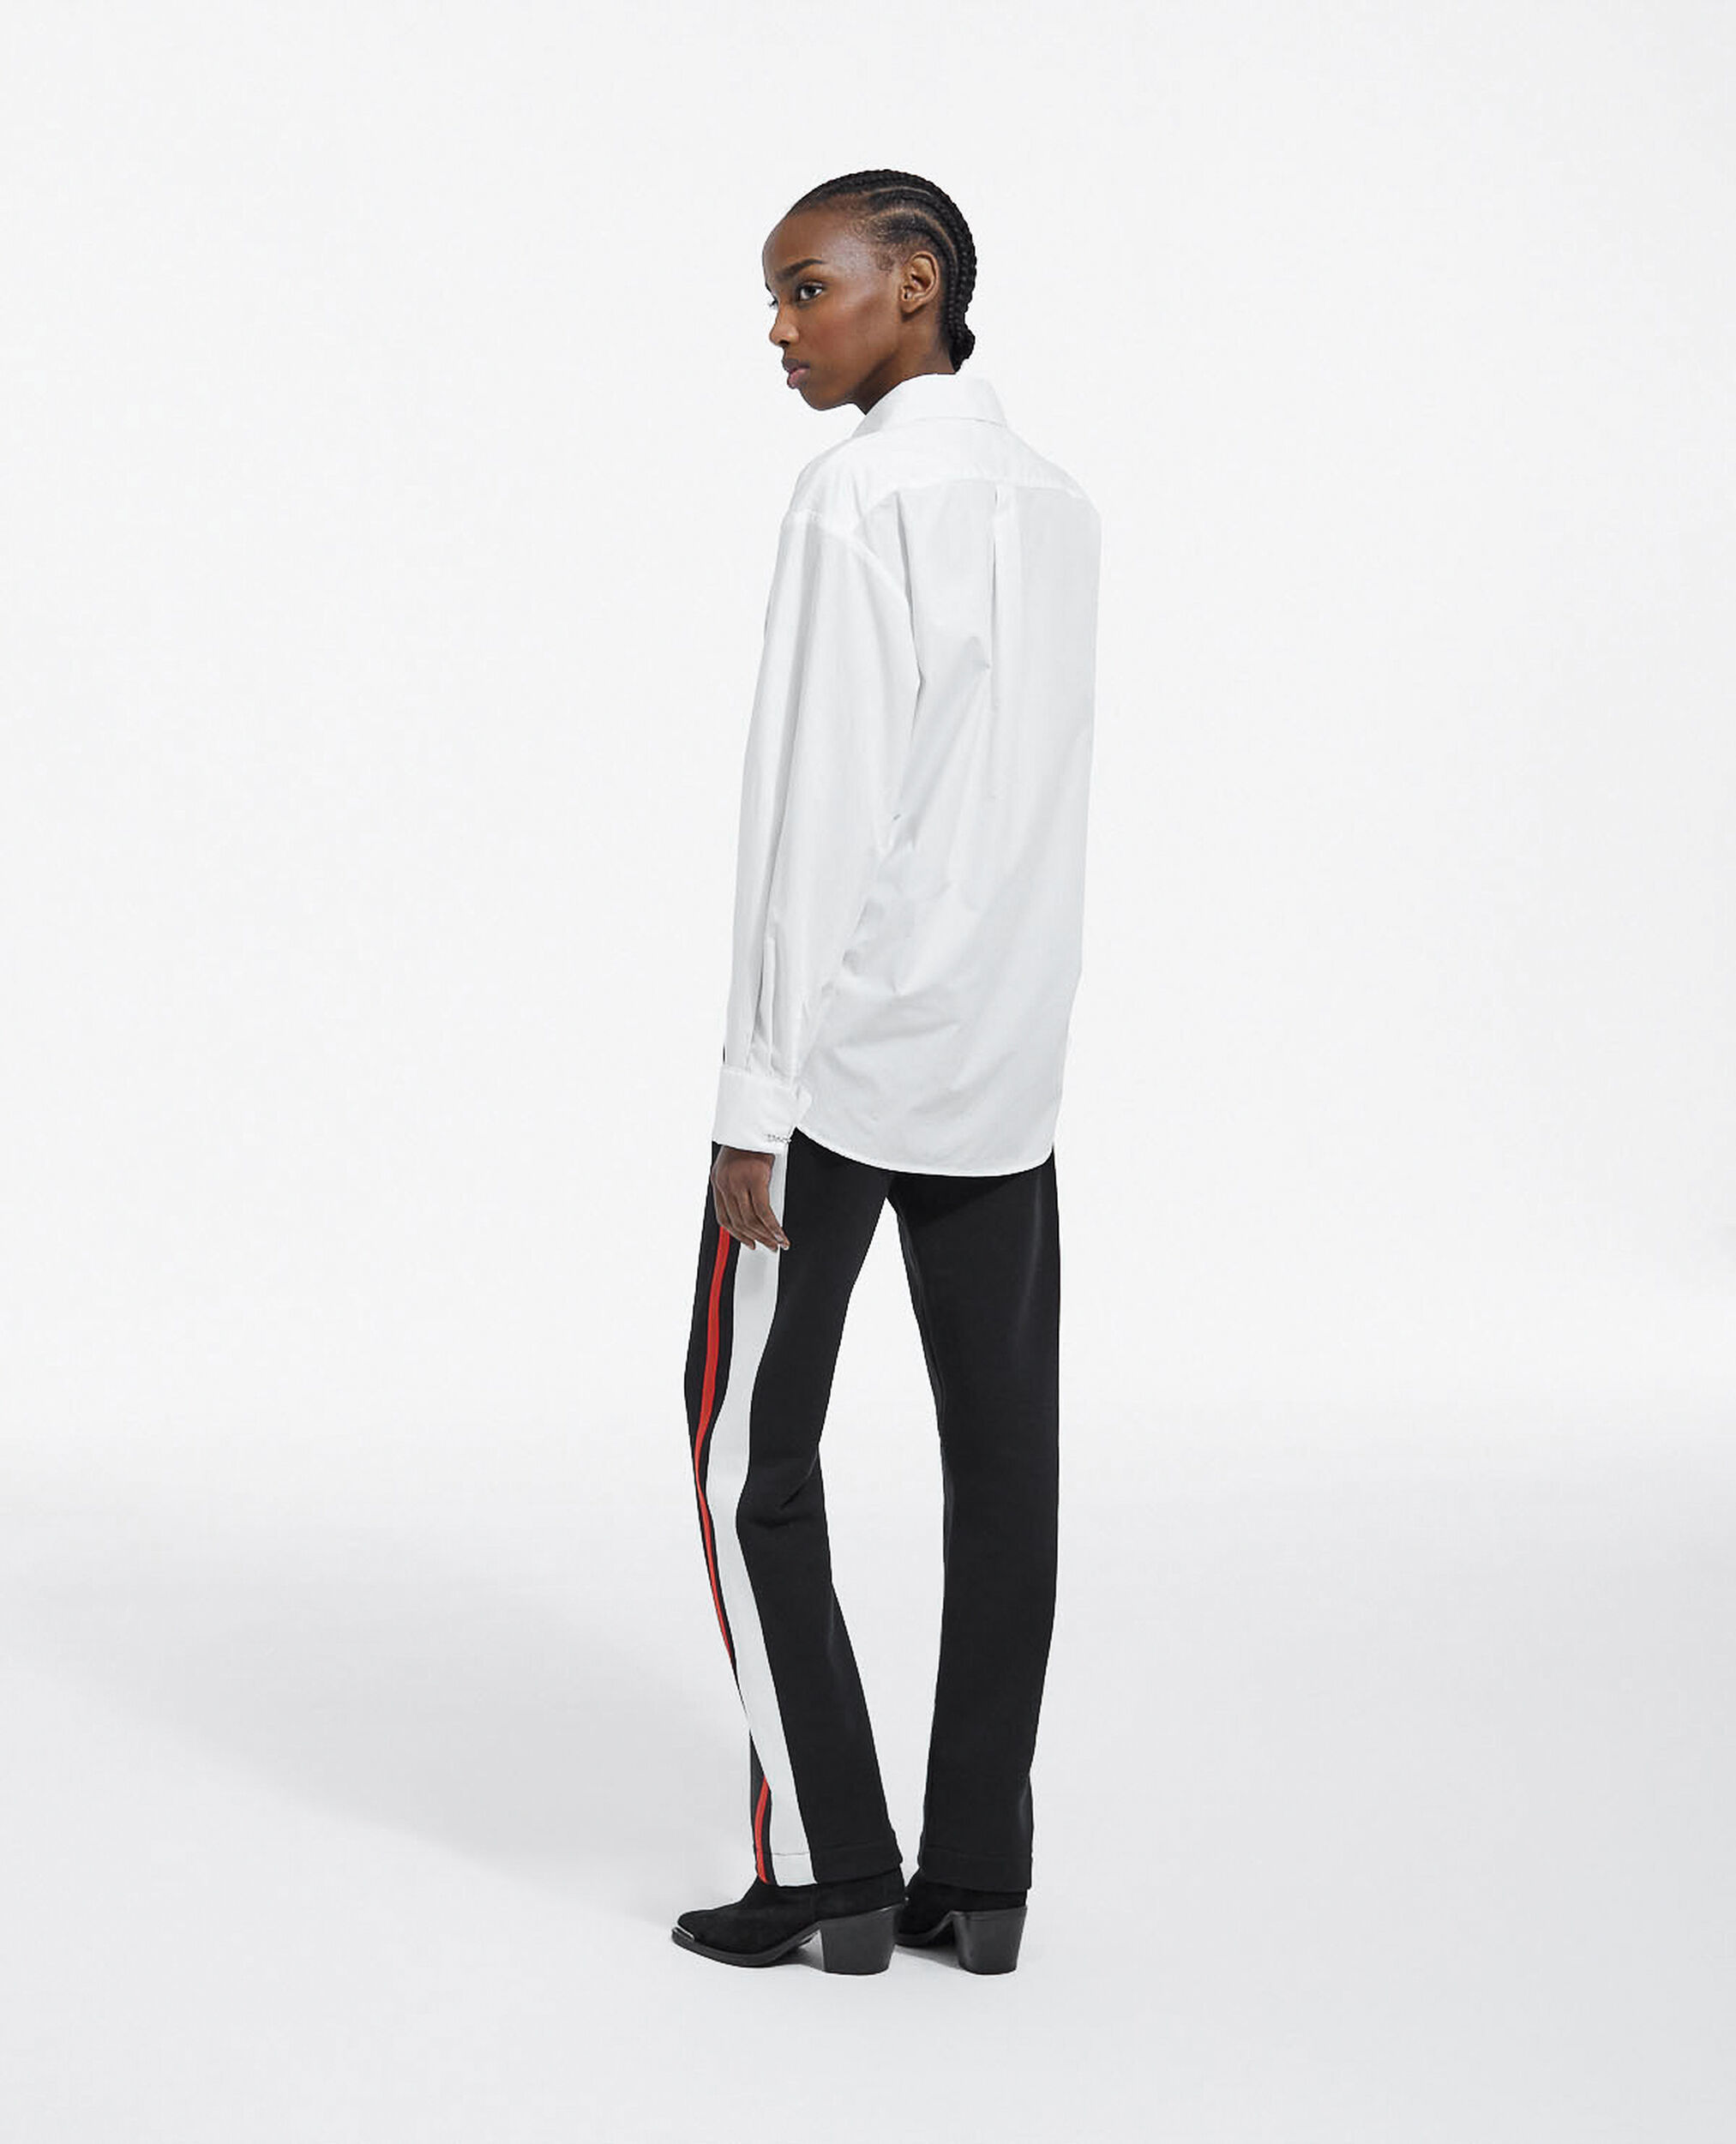 Straight-cut joggers, BLACK, hi-res image number null